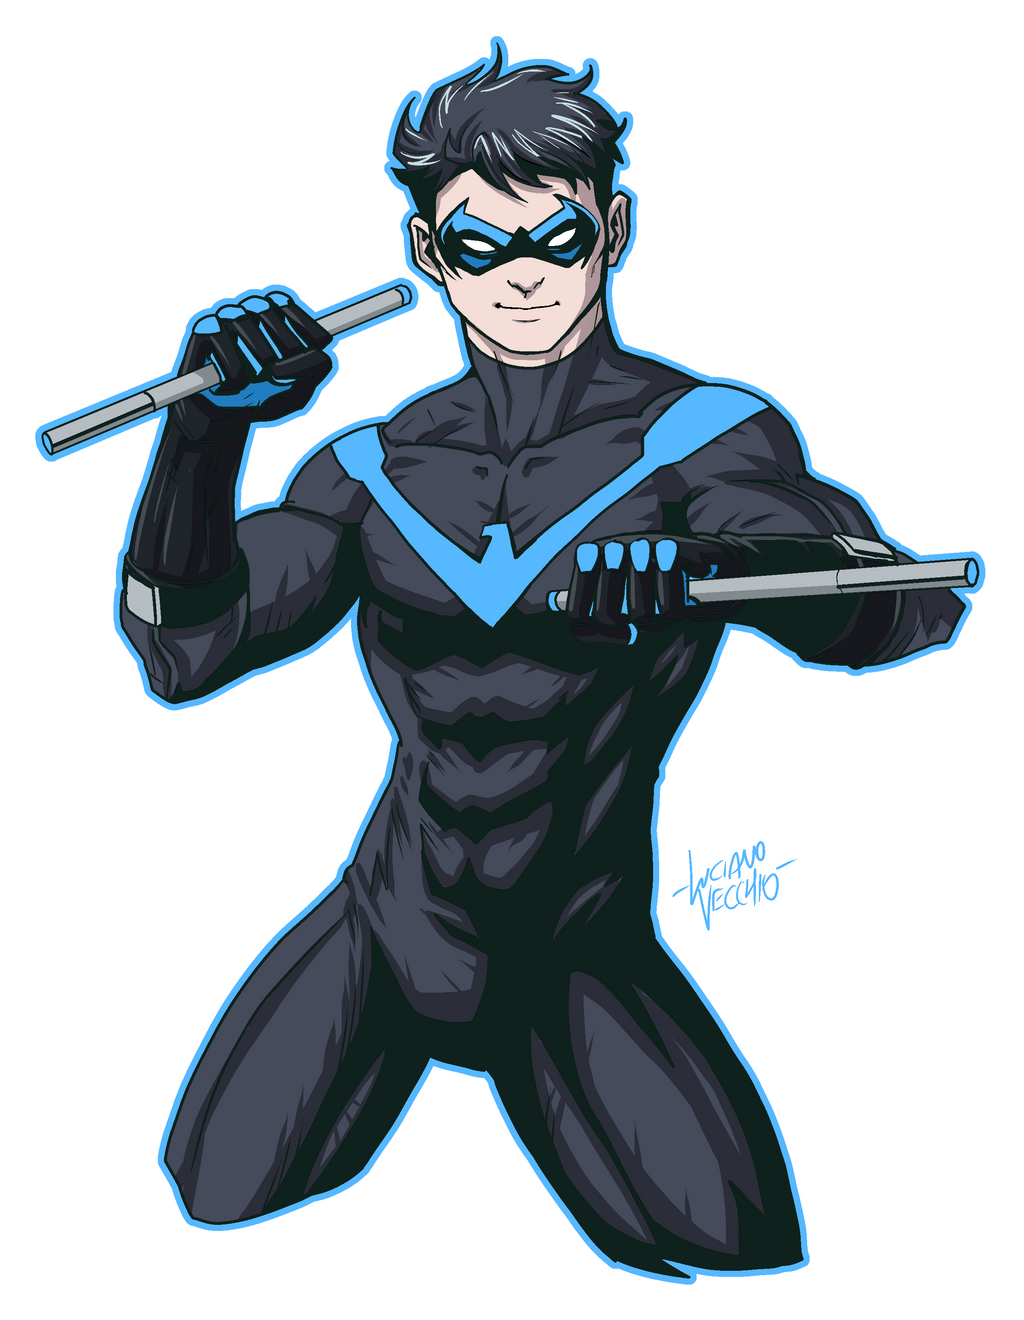 Nightwing Art by lucianovecchio